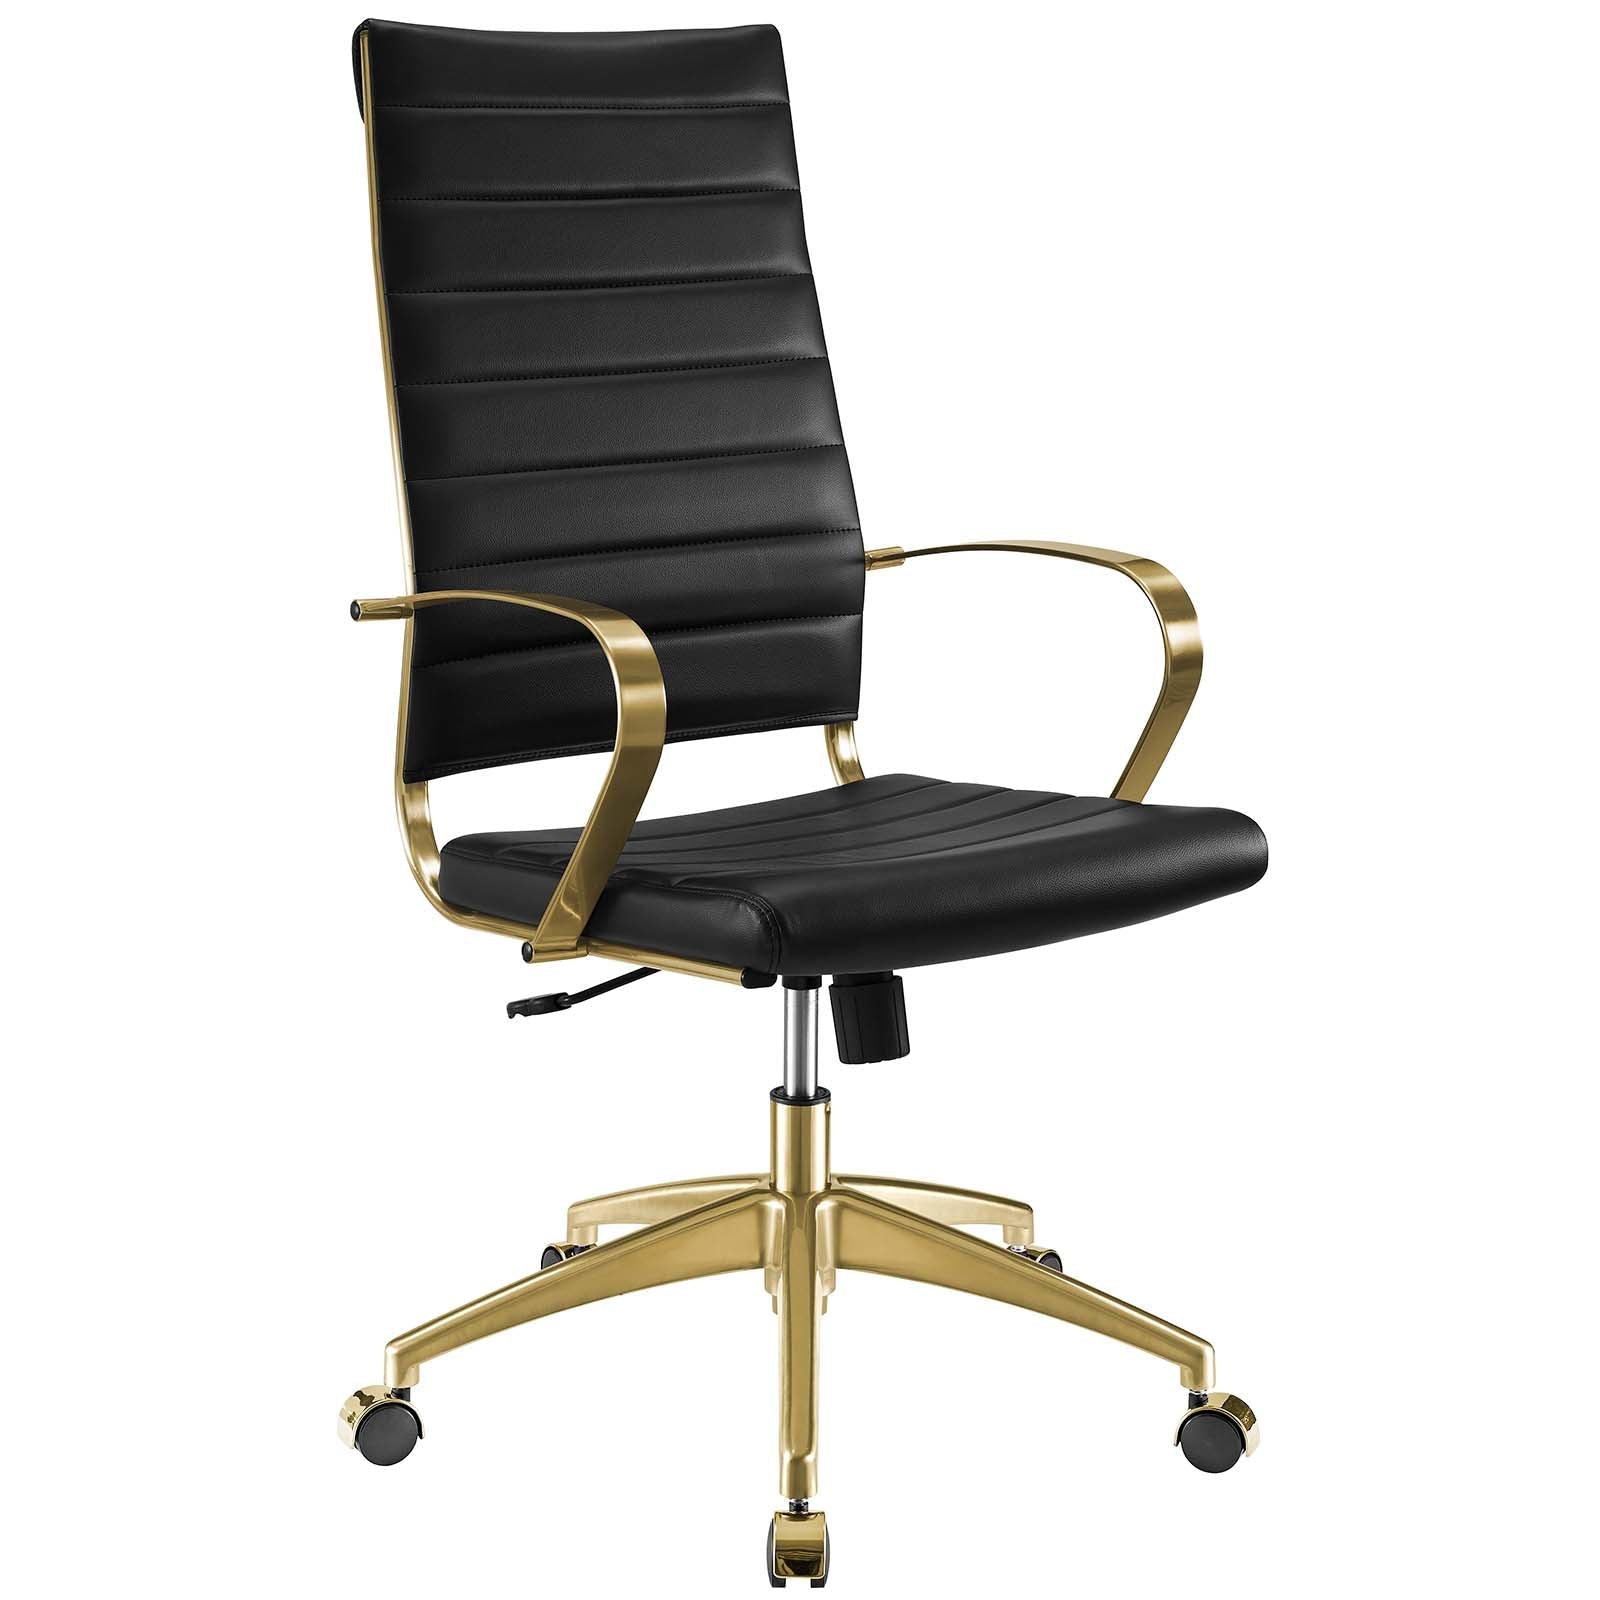 Deluxe Gold Stainless Steel Highback Office Chair